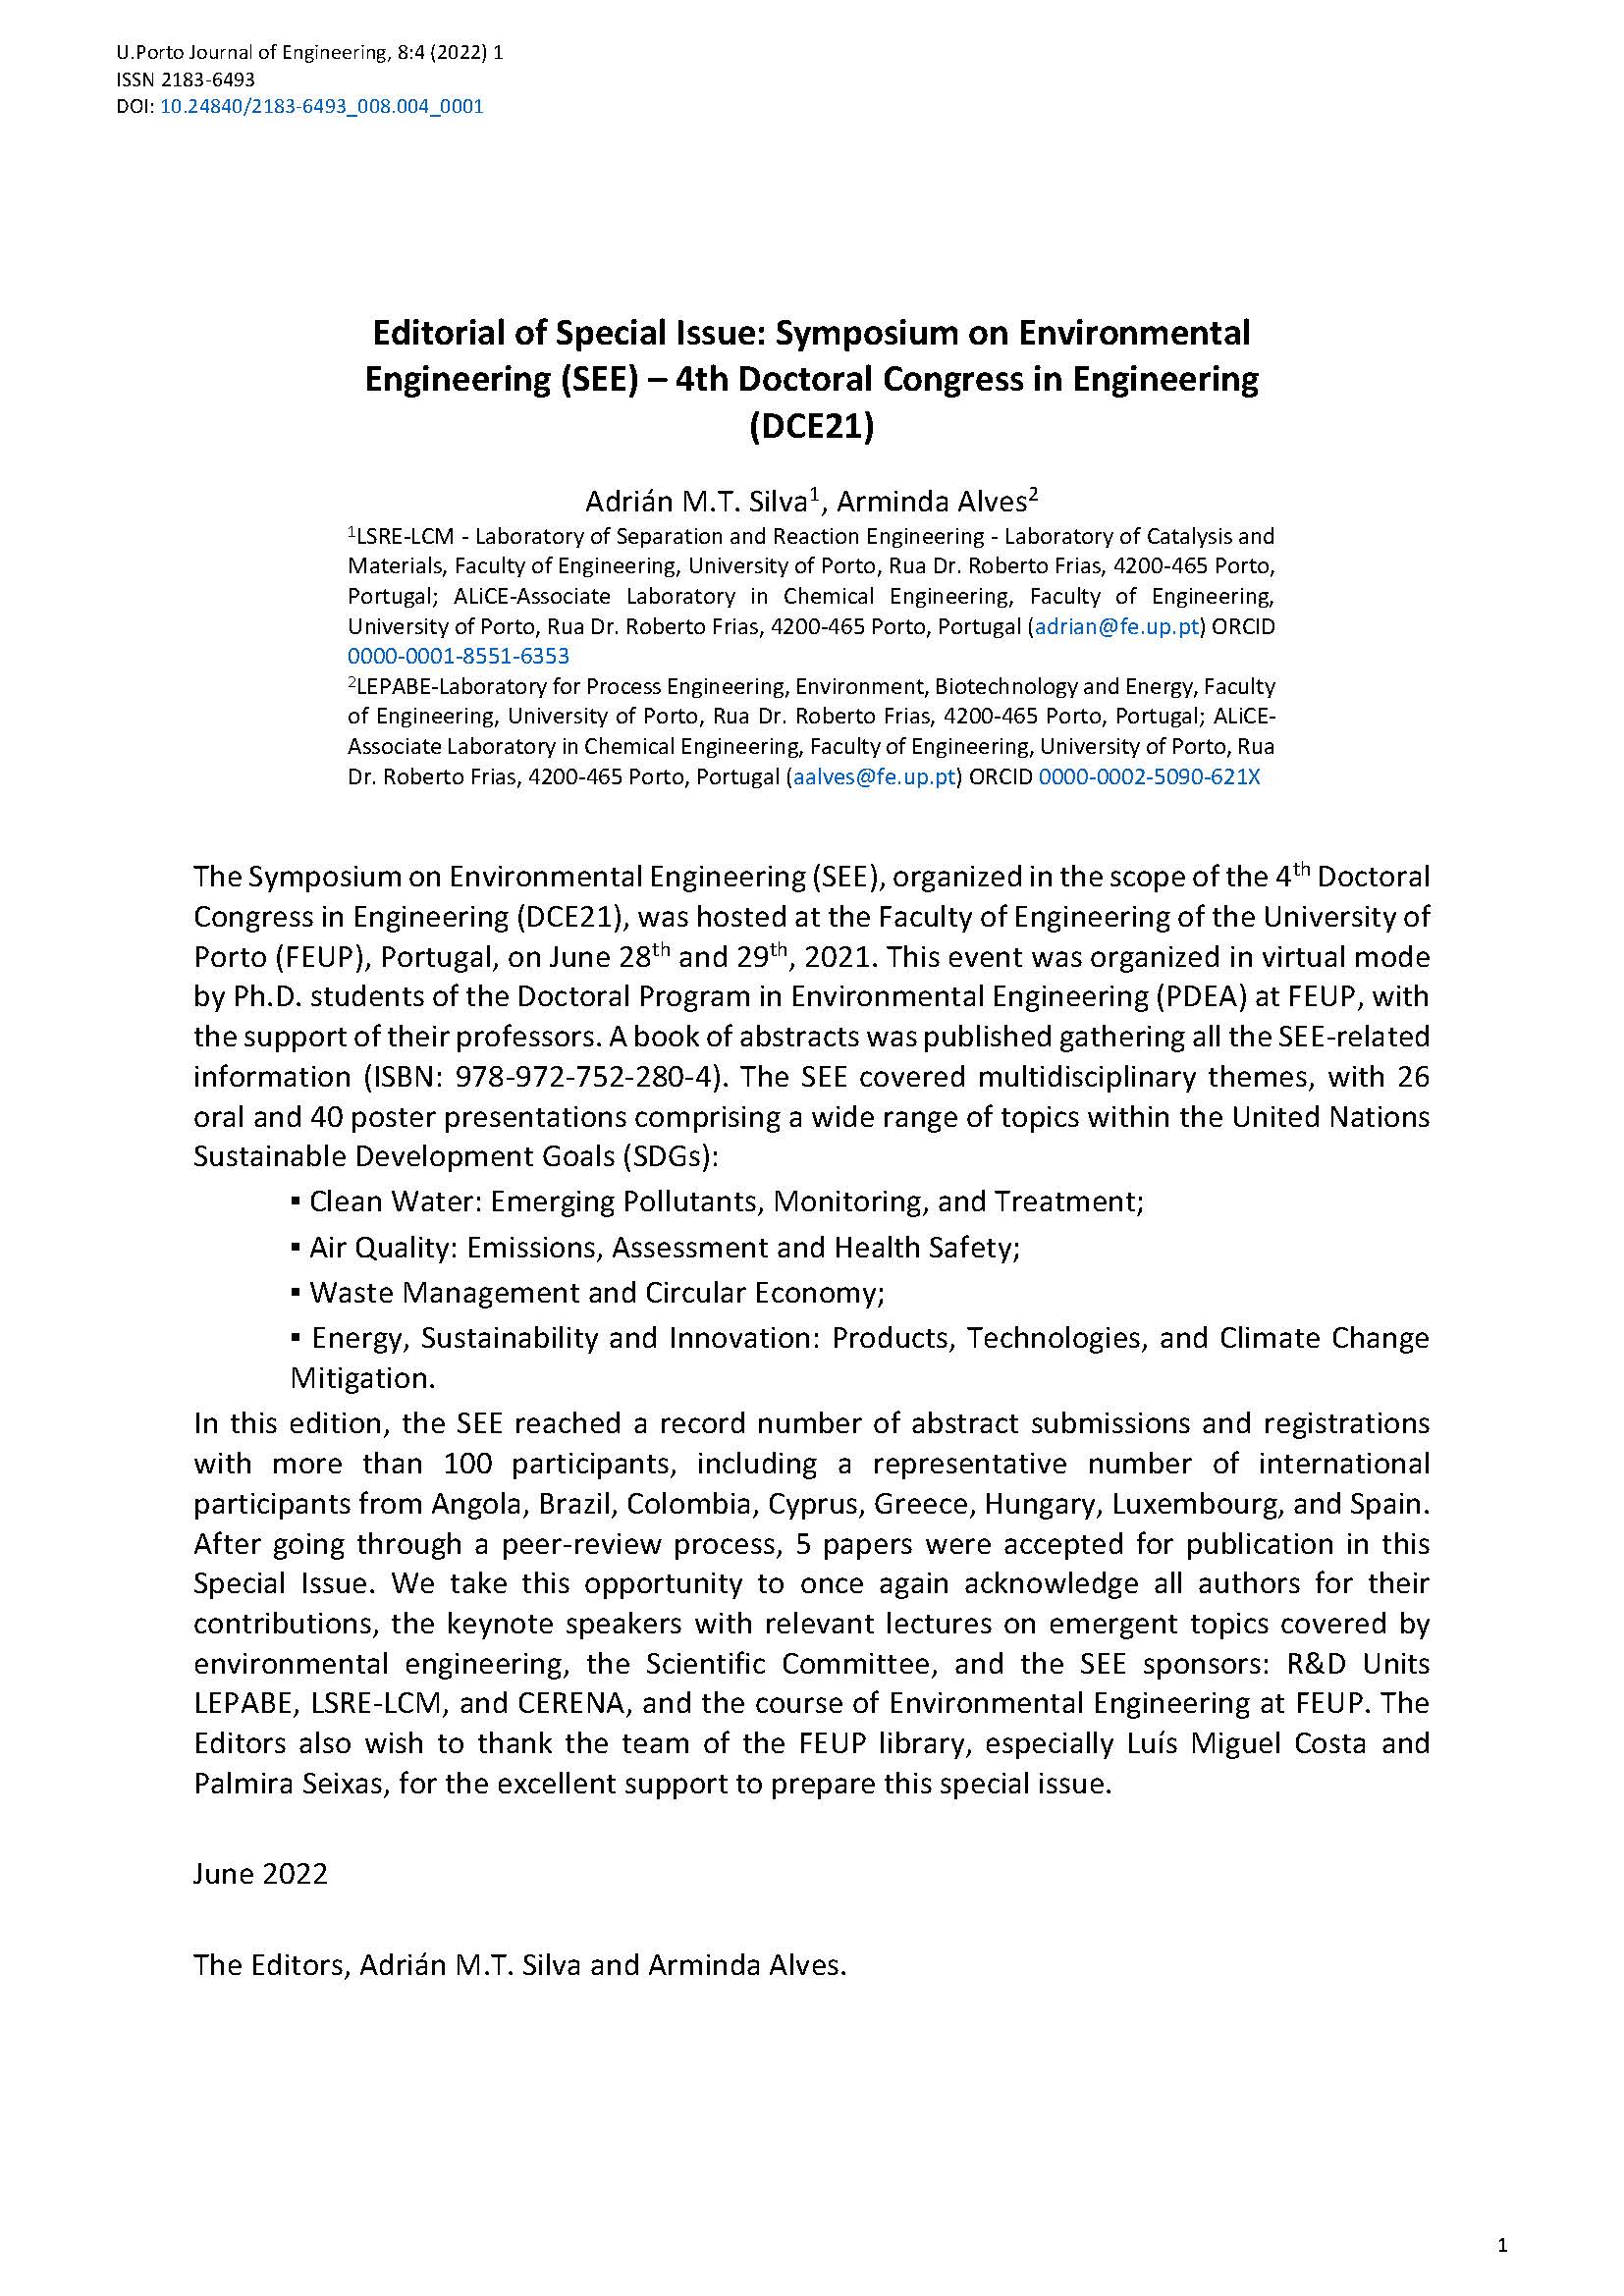 Editorial of Special Issue: Symposium on Environmental Engineering (SEE) – 4th Doctoral Congress in Engineering (DCE21)